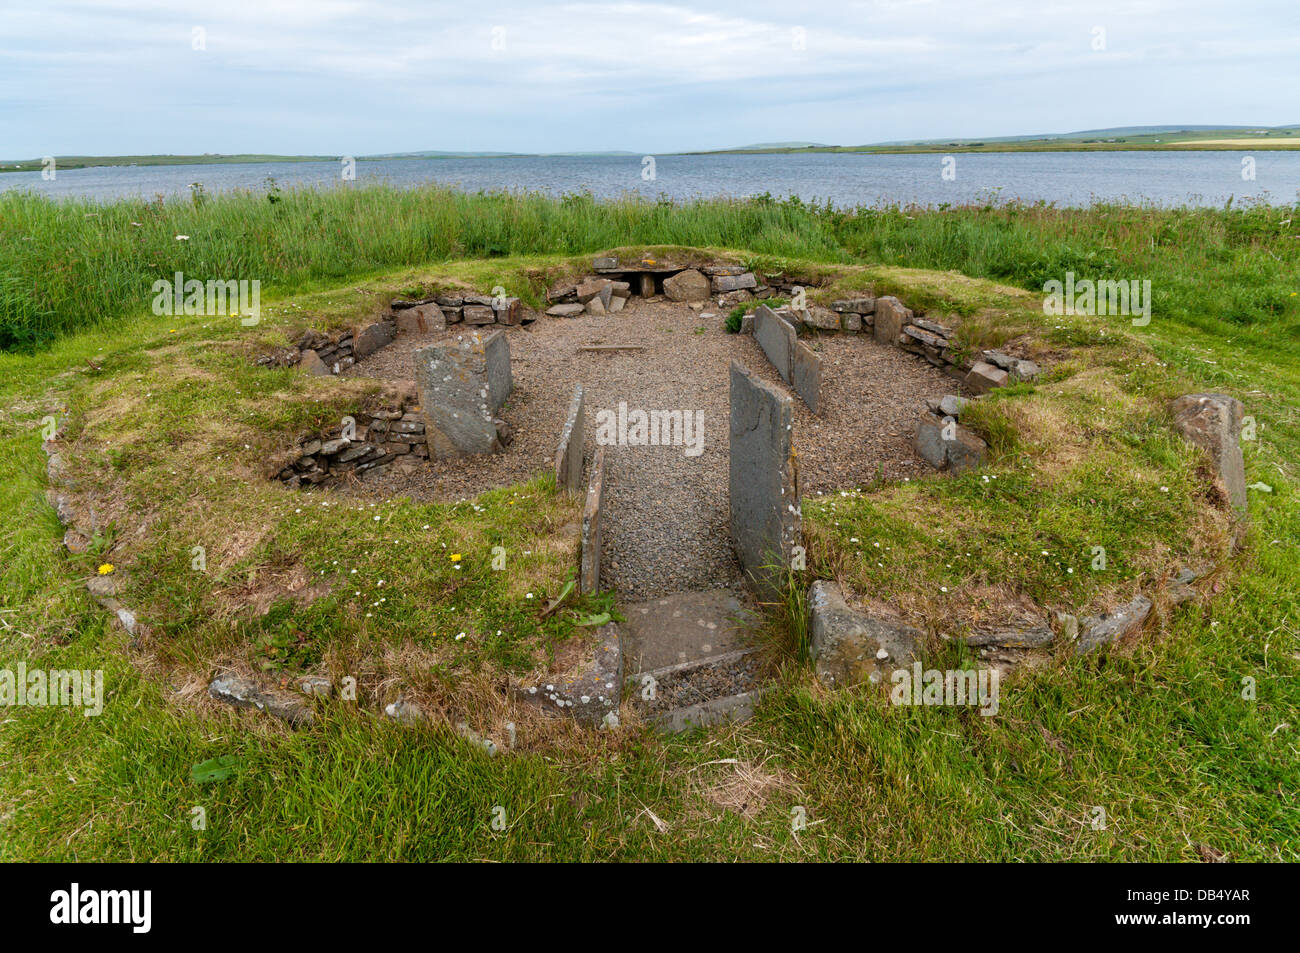 House 3 of the Barnhouse Neolithic Village with the Loch of Harray in the background. Stock Photo